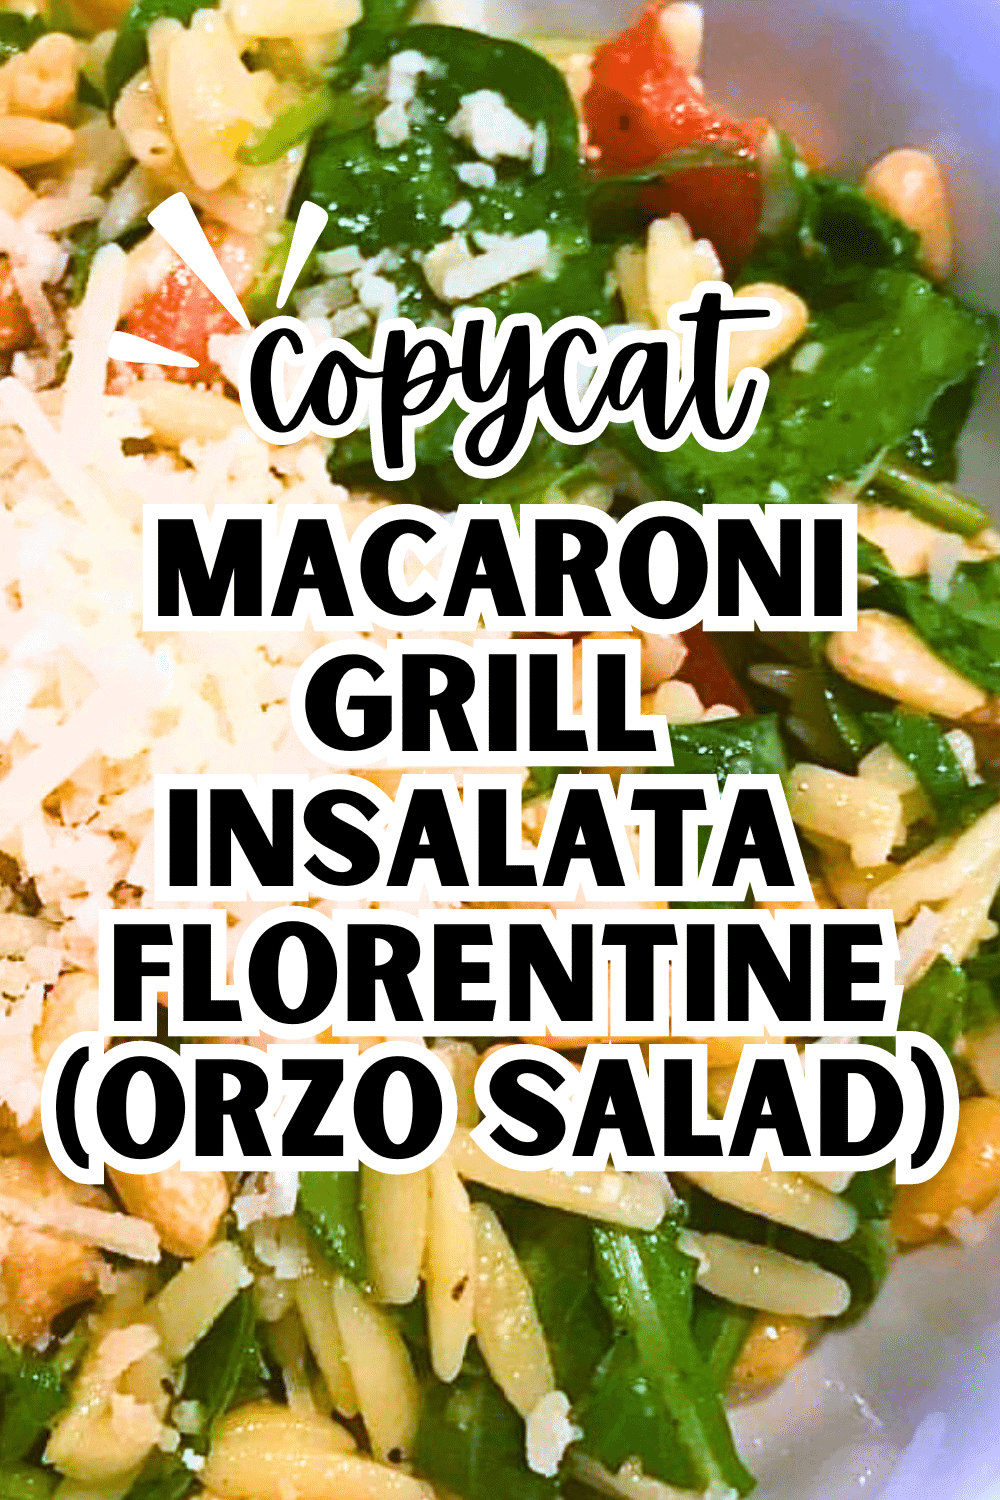 Copycat Macaroni Grill Insalata Florentine Recipe Orzo Chicken Salad text over picture of orzo salad in a bowl